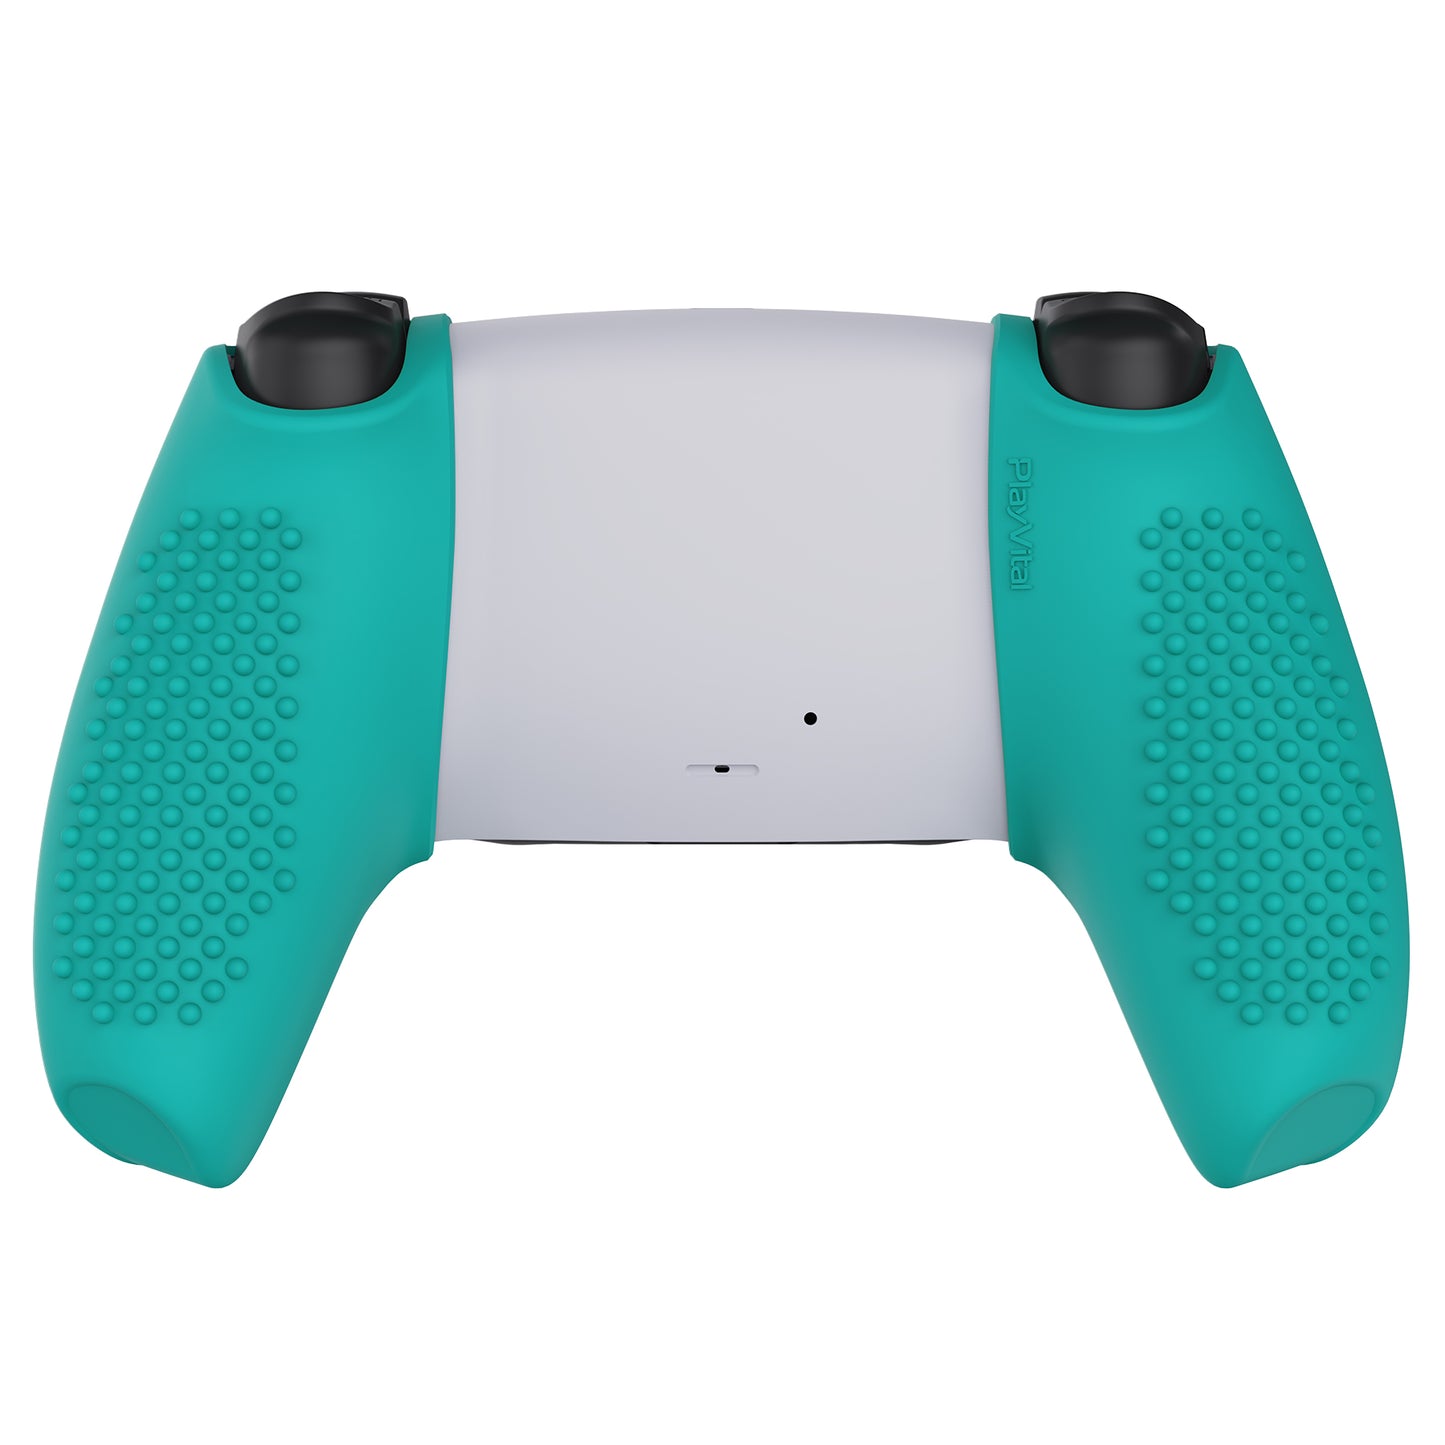 PlayVital 3D Studded Edition Anti-Slip Silicone Cover Skin with Thumb Grip Caps for PS5 Wireless Controller, Compatible with Charging Station - Aqua Green  - TDPF020 PlayVital